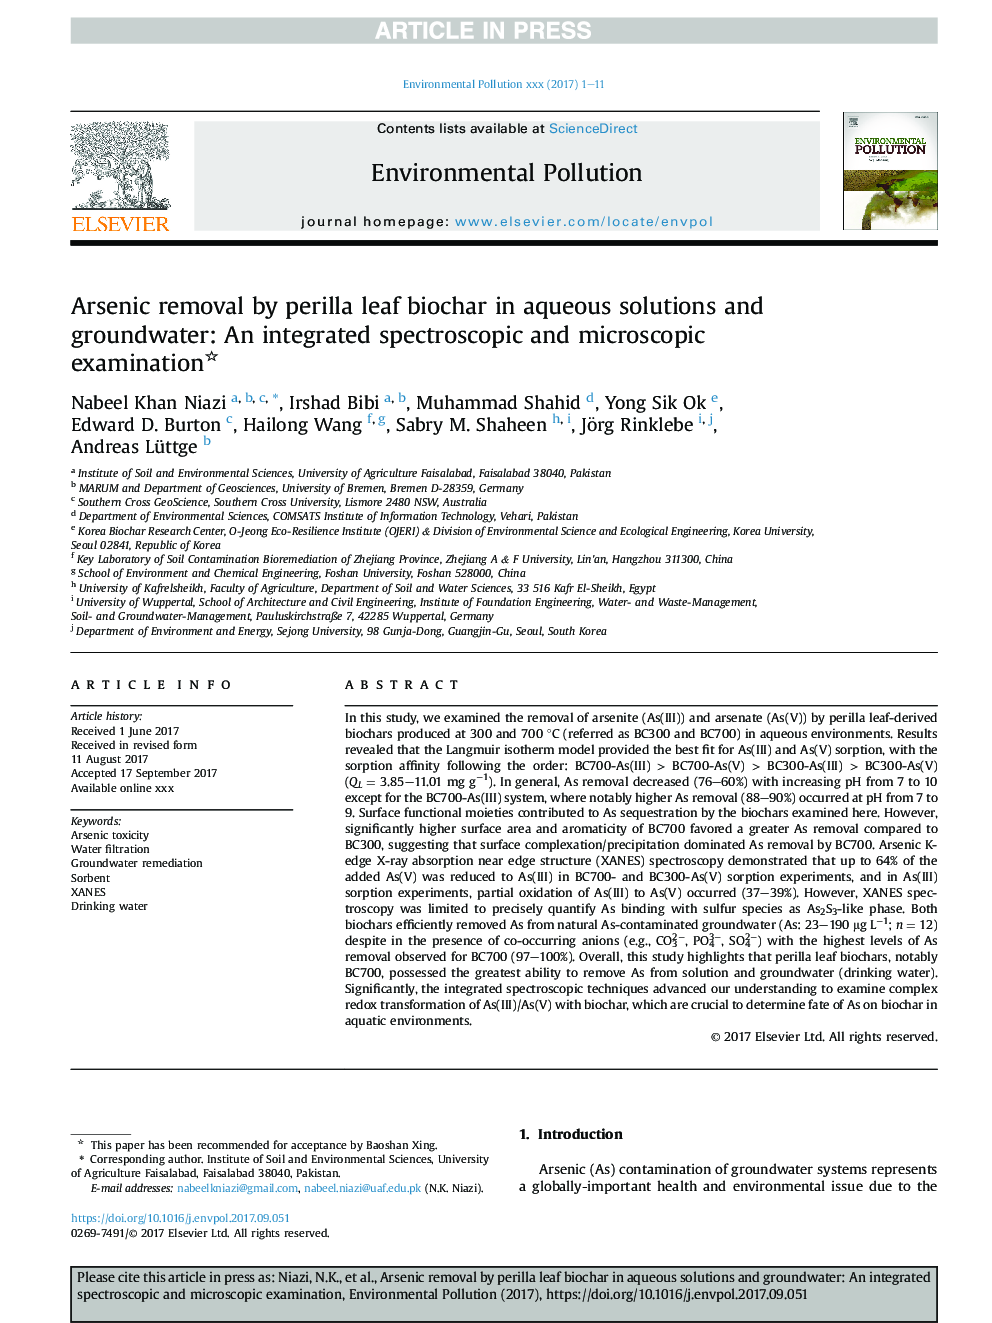 Arsenic removal by perilla leaf biochar in aqueous solutions and groundwater: An integrated spectroscopic and microscopic examination